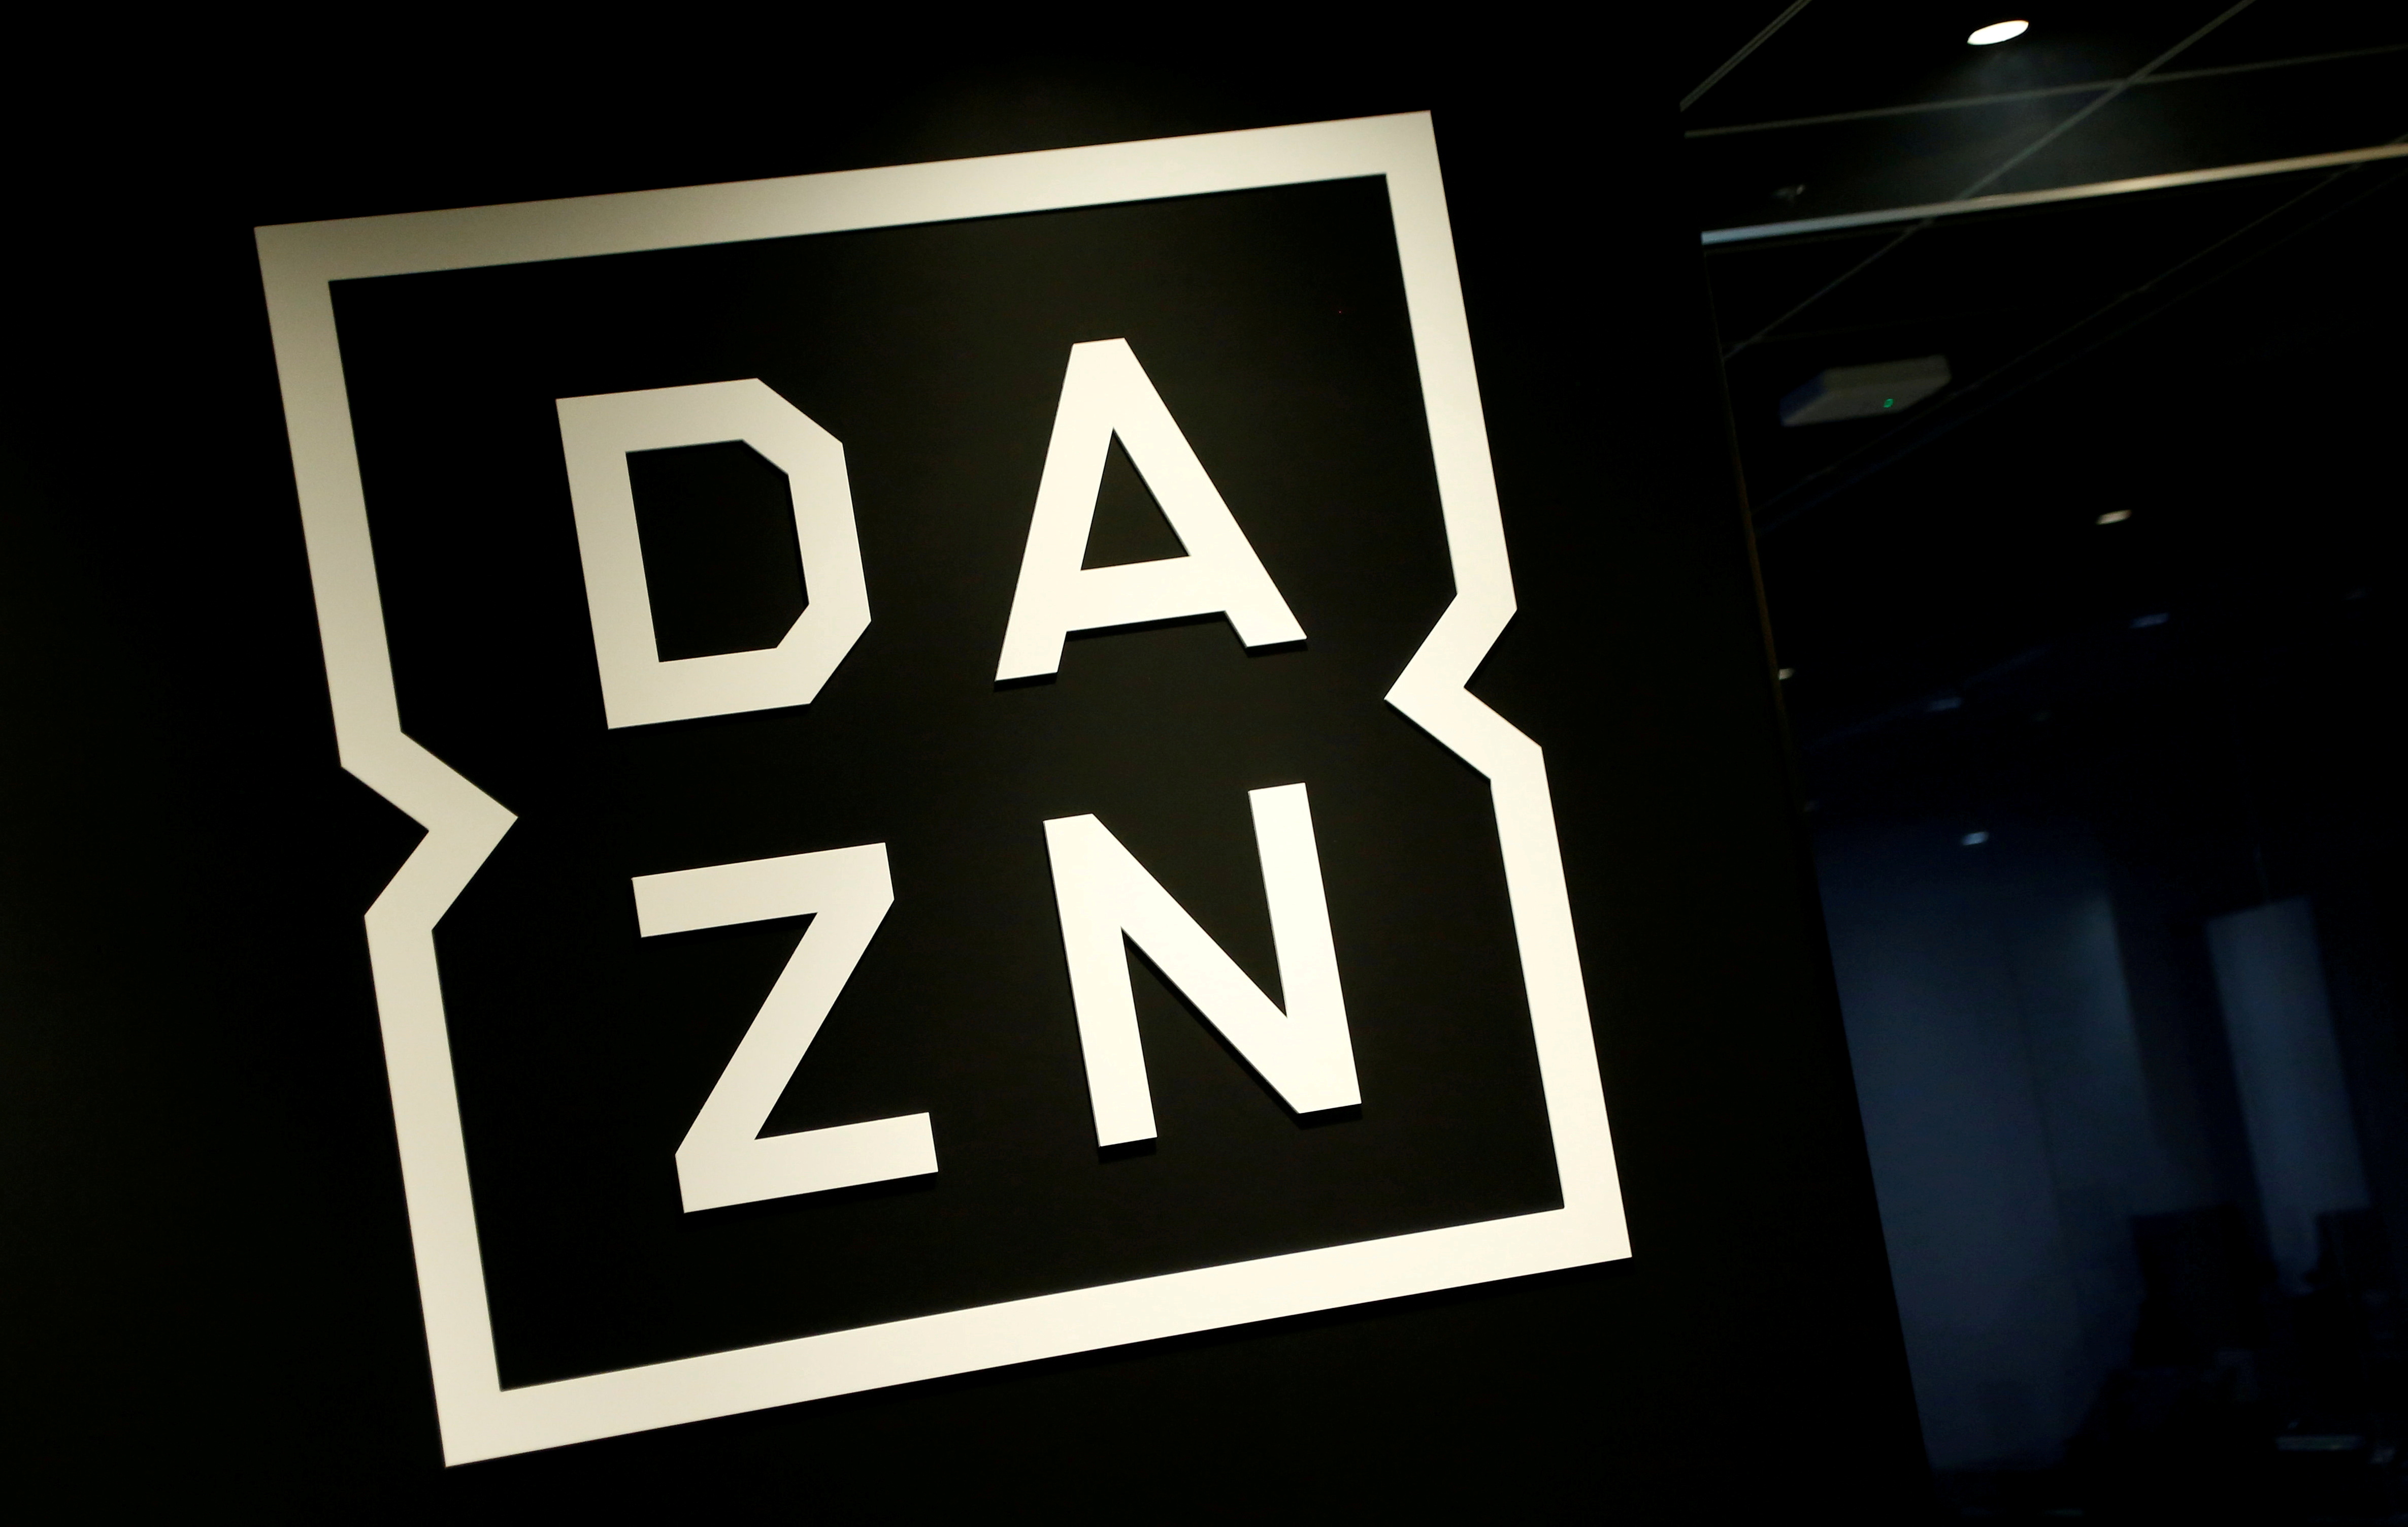 Internet streaming service DAZN's logo is pictured in its office in Tokyo